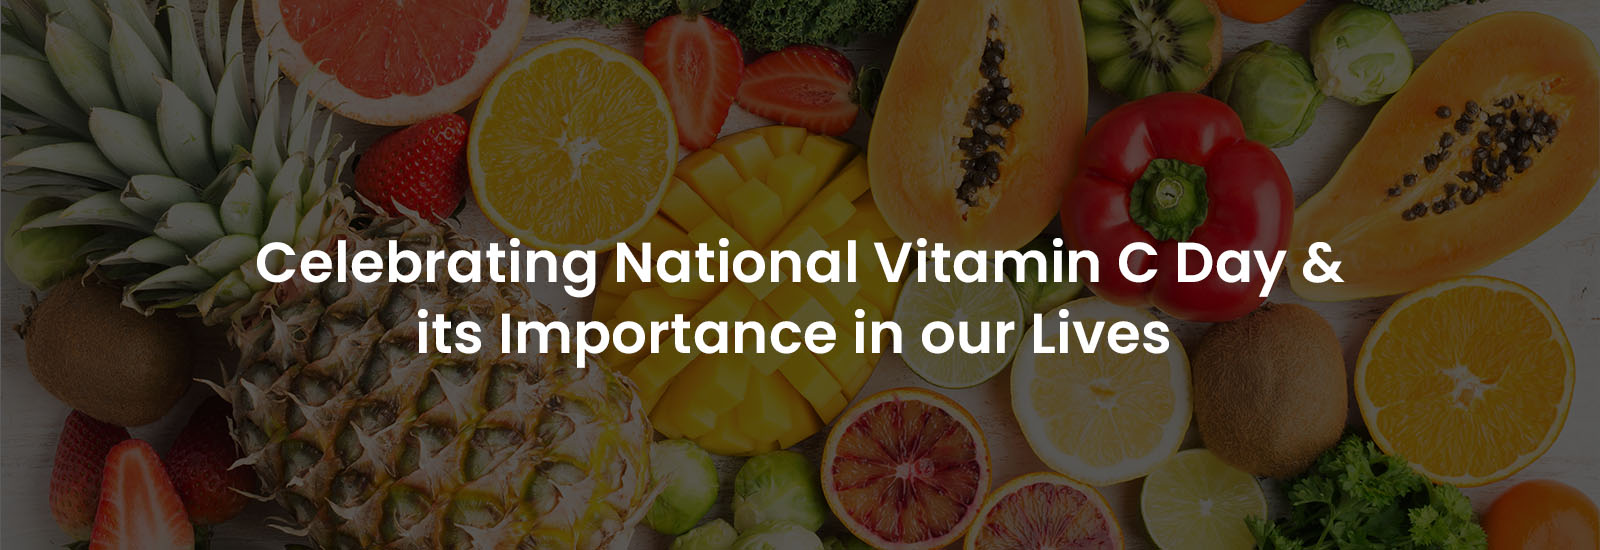 Celebrating National Vitamin C Day & its Importance in Our Lives